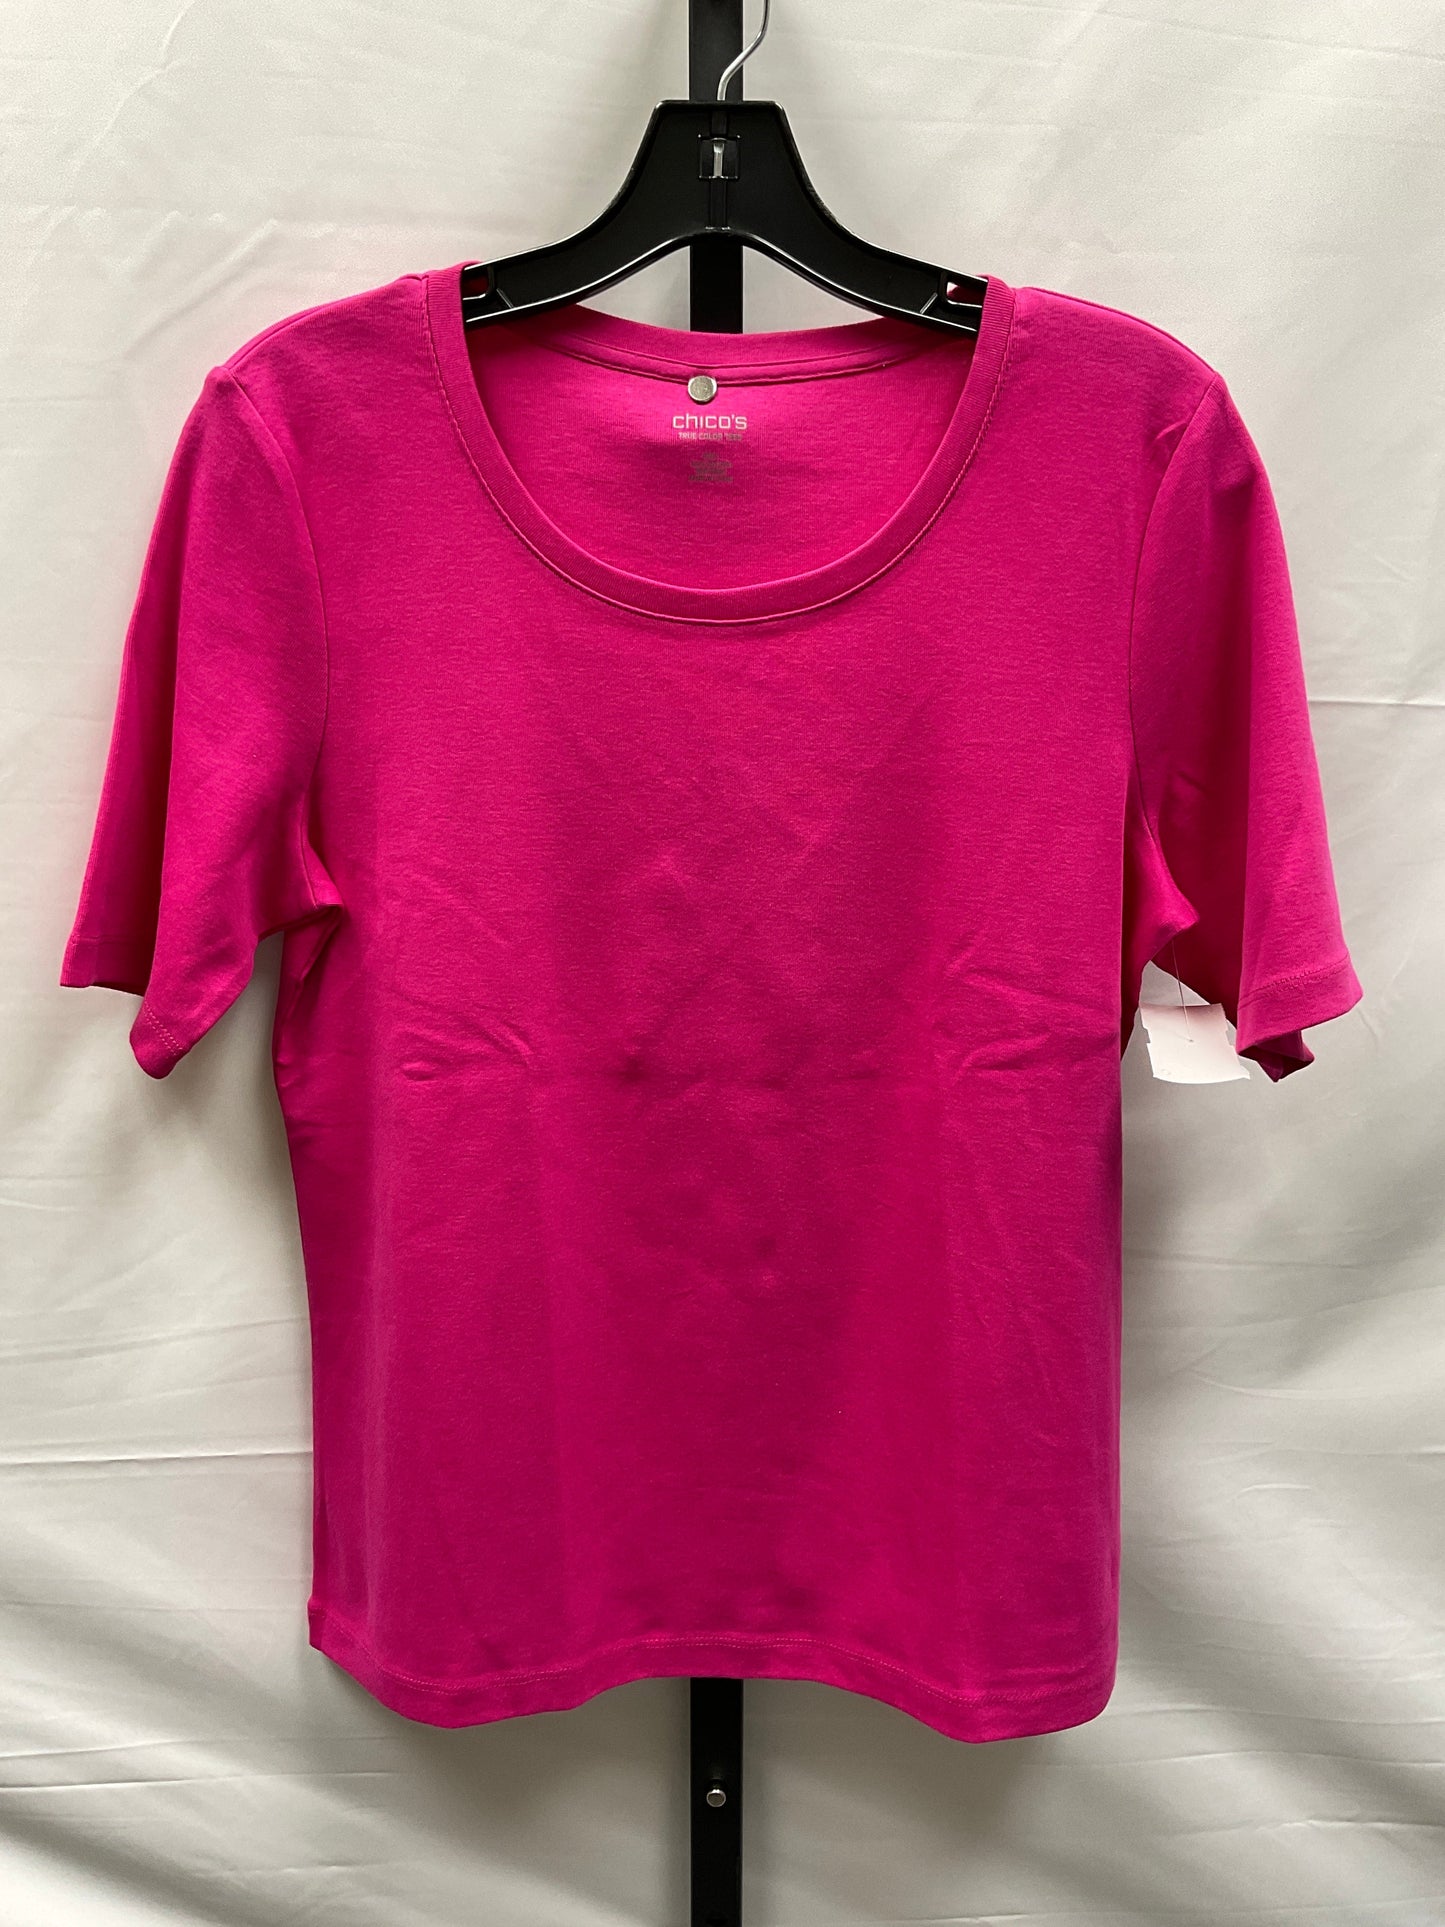 Pink Top Short Sleeve Basic Chicos, Size M